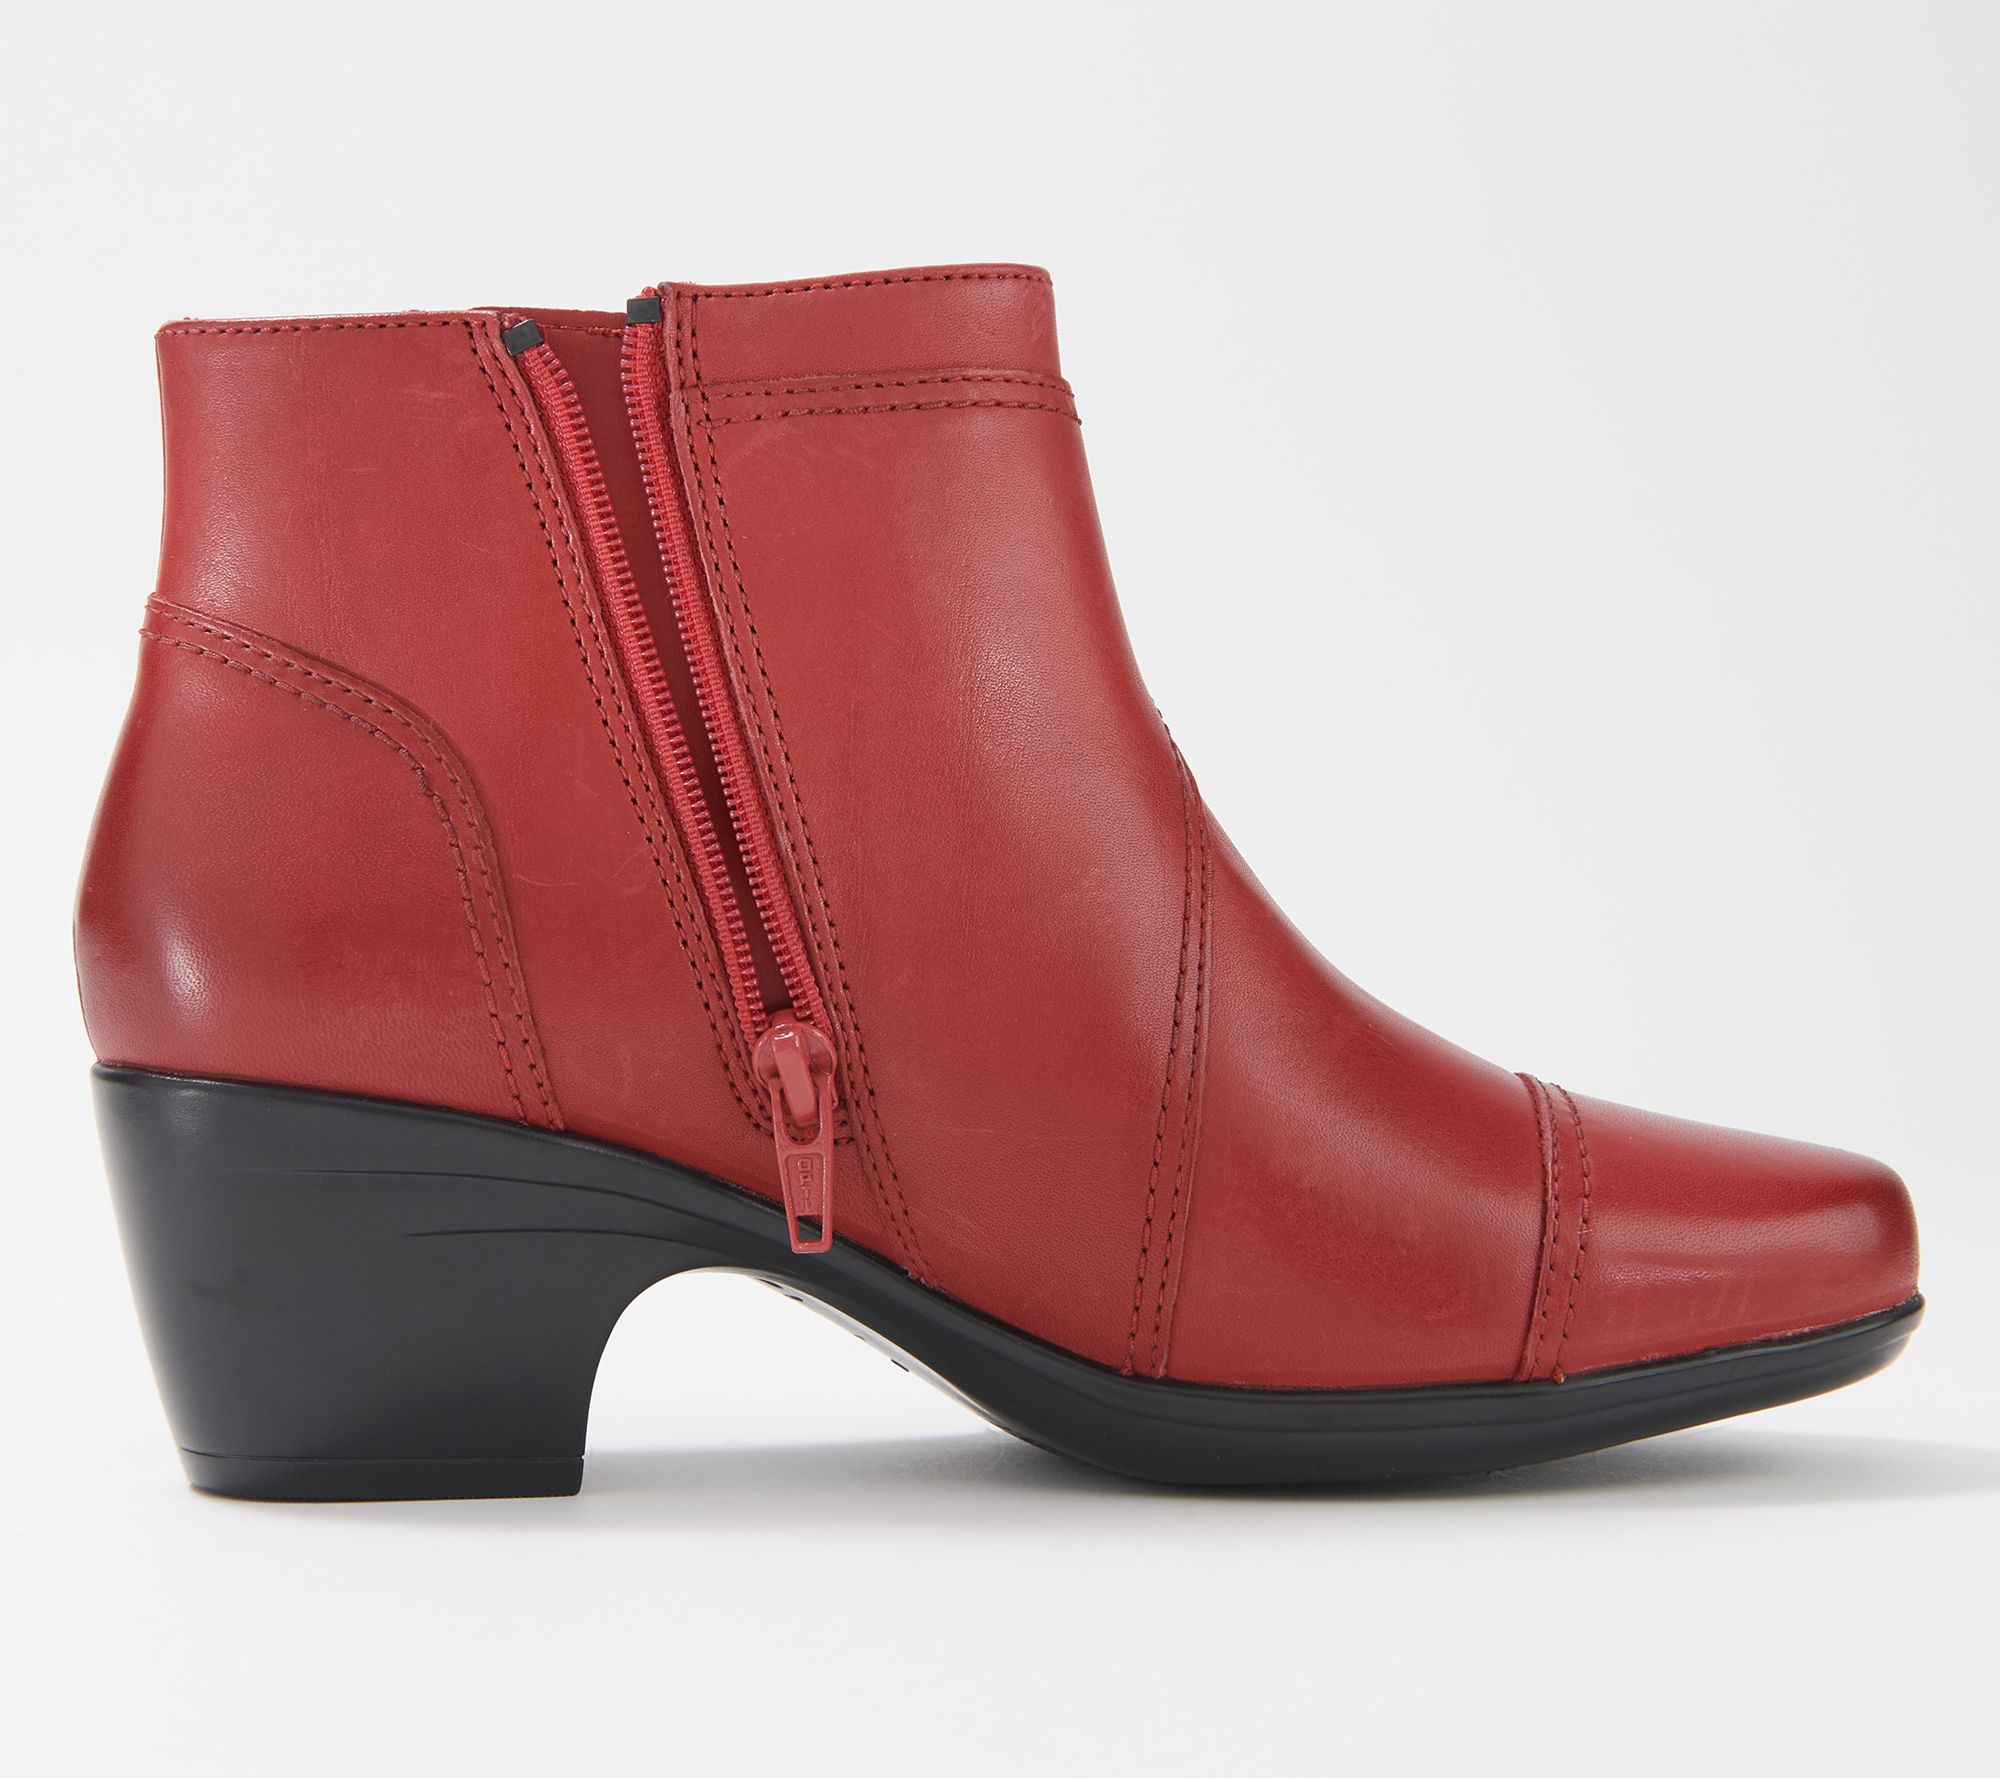 Clarks Collection Leather Heeled Ankle Boots - Emily Calle - QVC.com